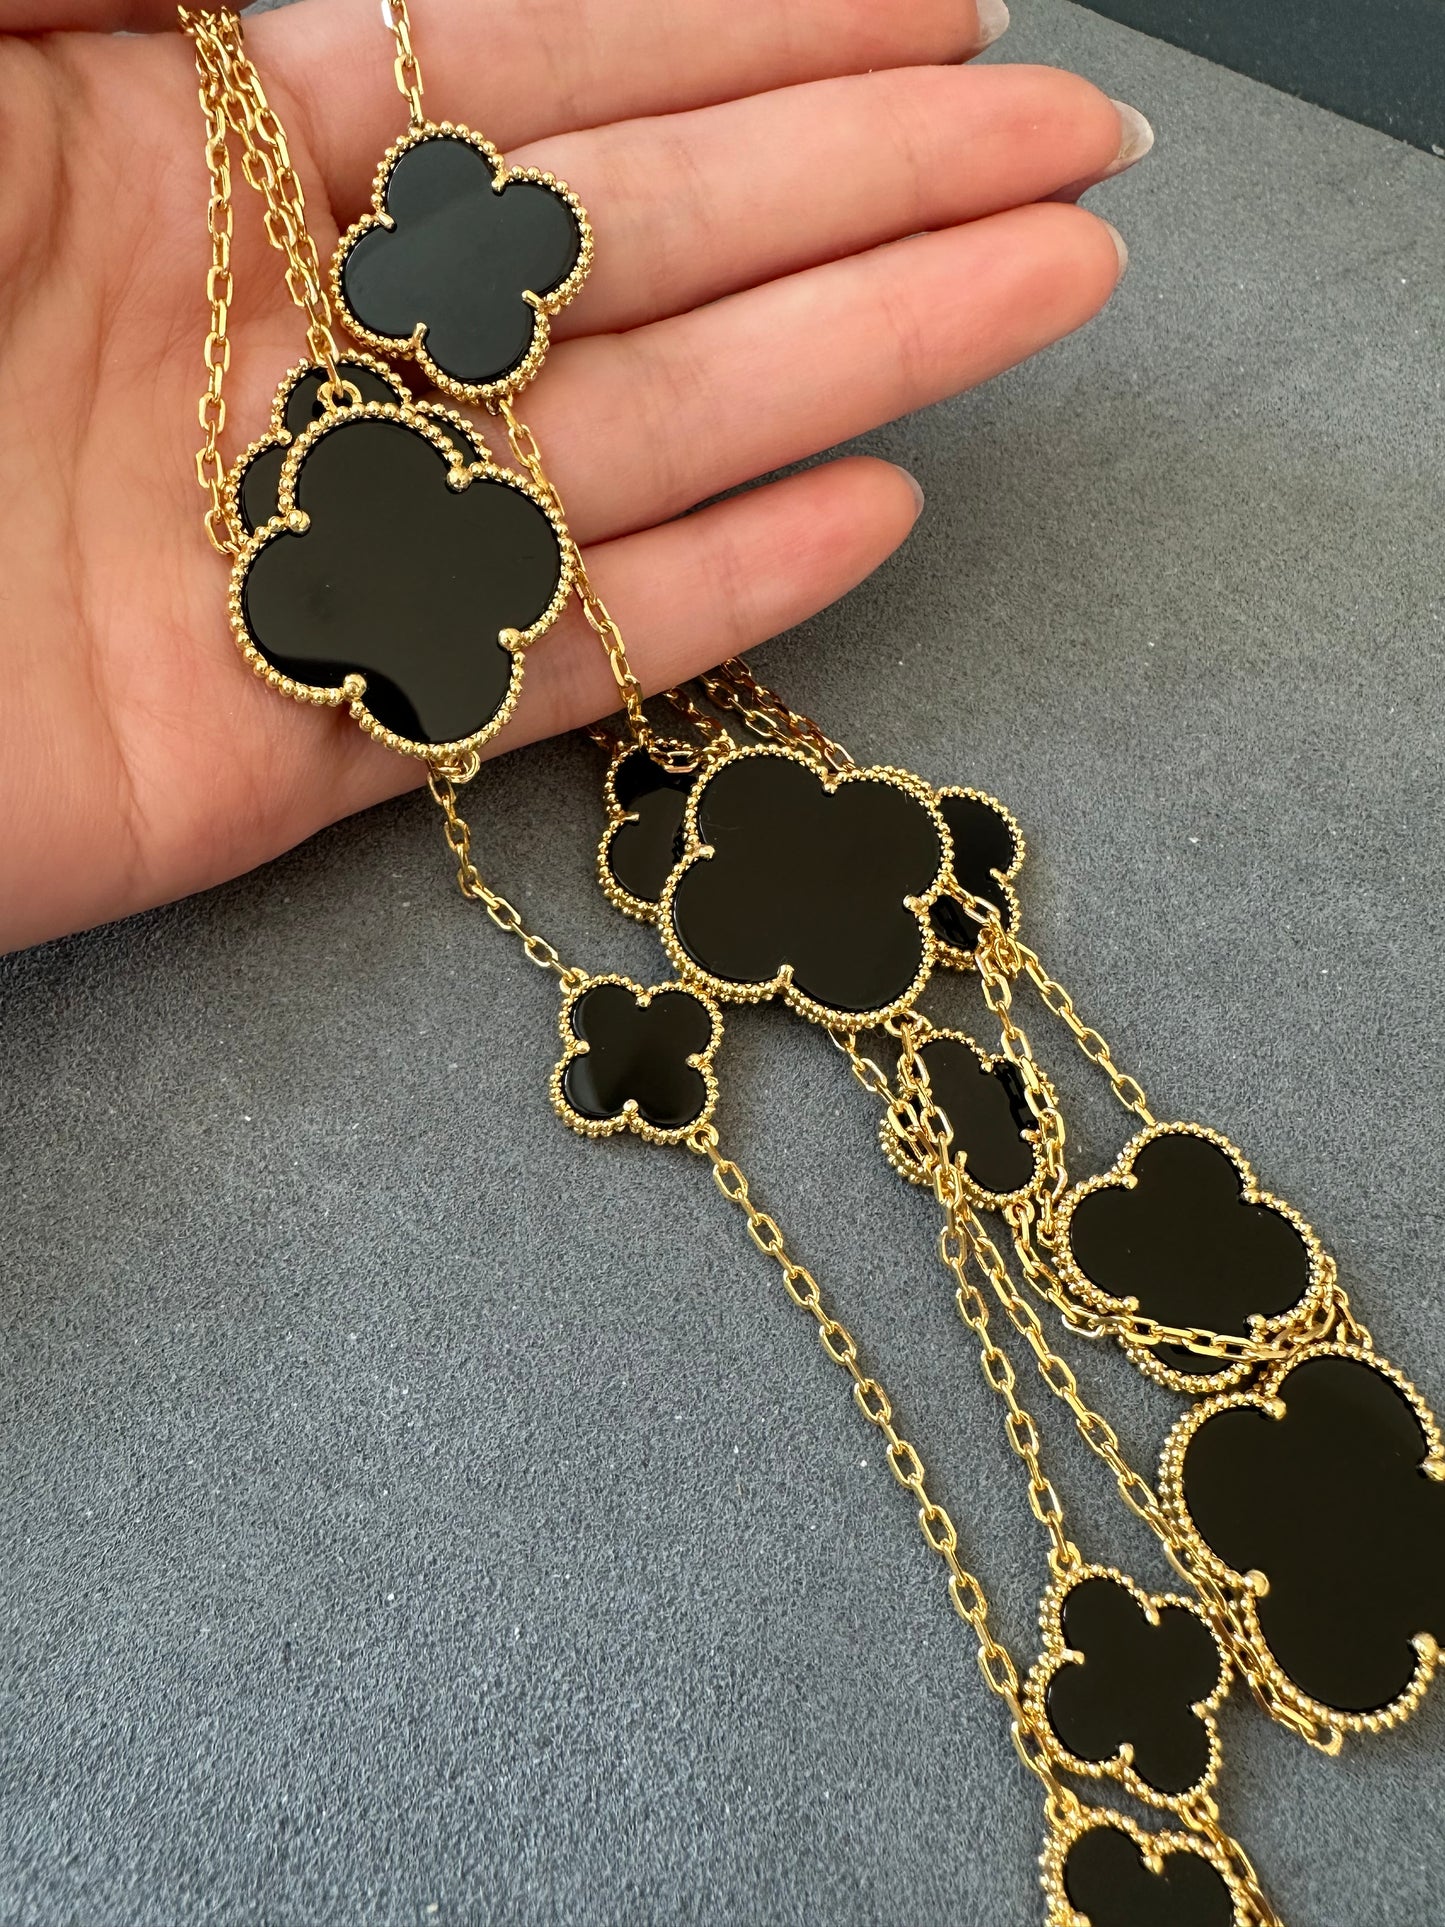 16 motifs onyx charm clover necklace 925 silver with 18k gold plated 120cm long - ParadiseKissCo